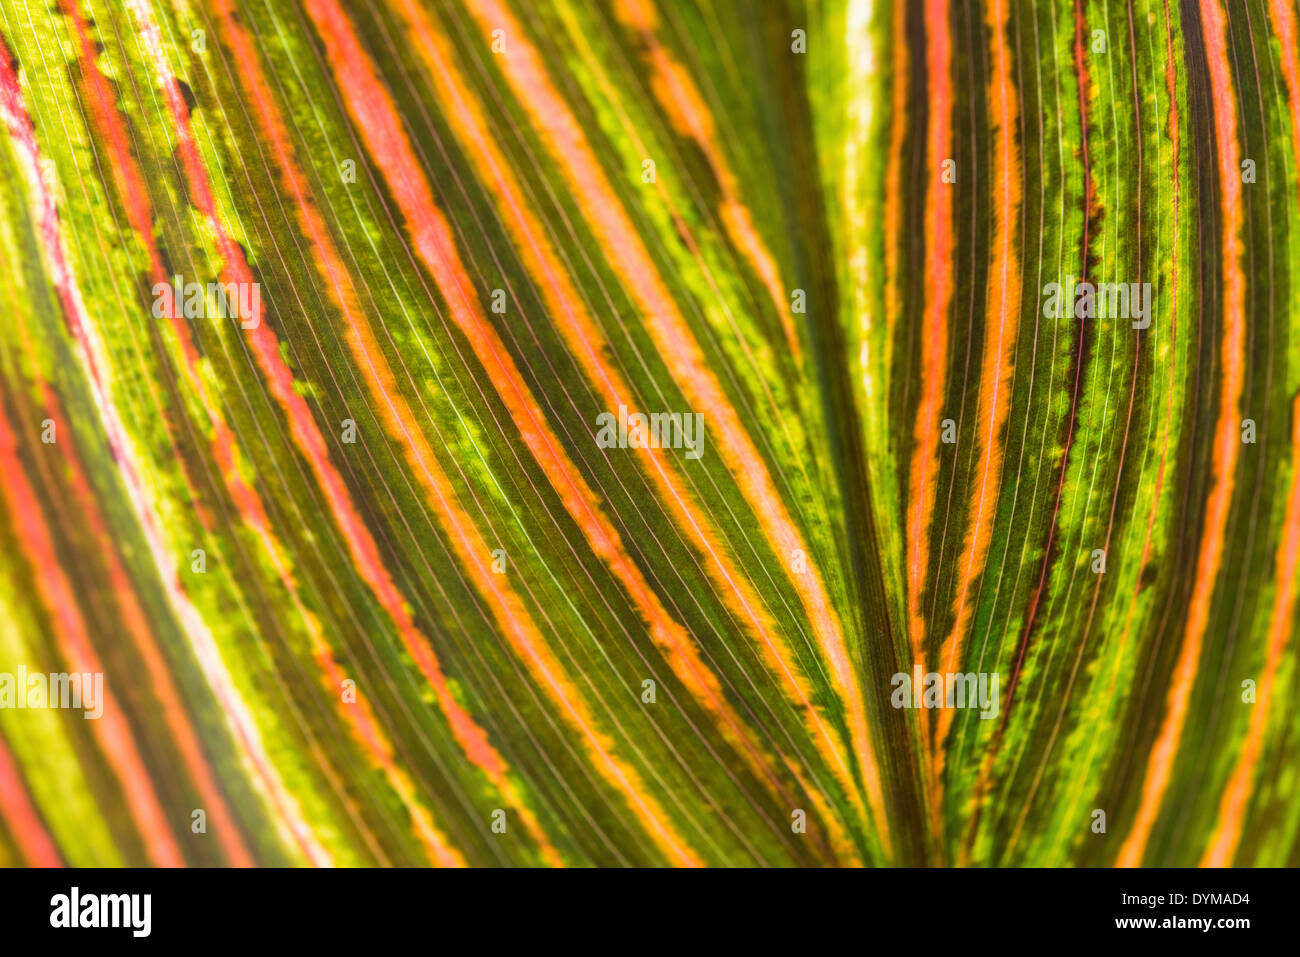 Garden Croton or Variegated Croton (Codiaeum variegatum), leaf from below, leaf structure, detail view Stock Photo